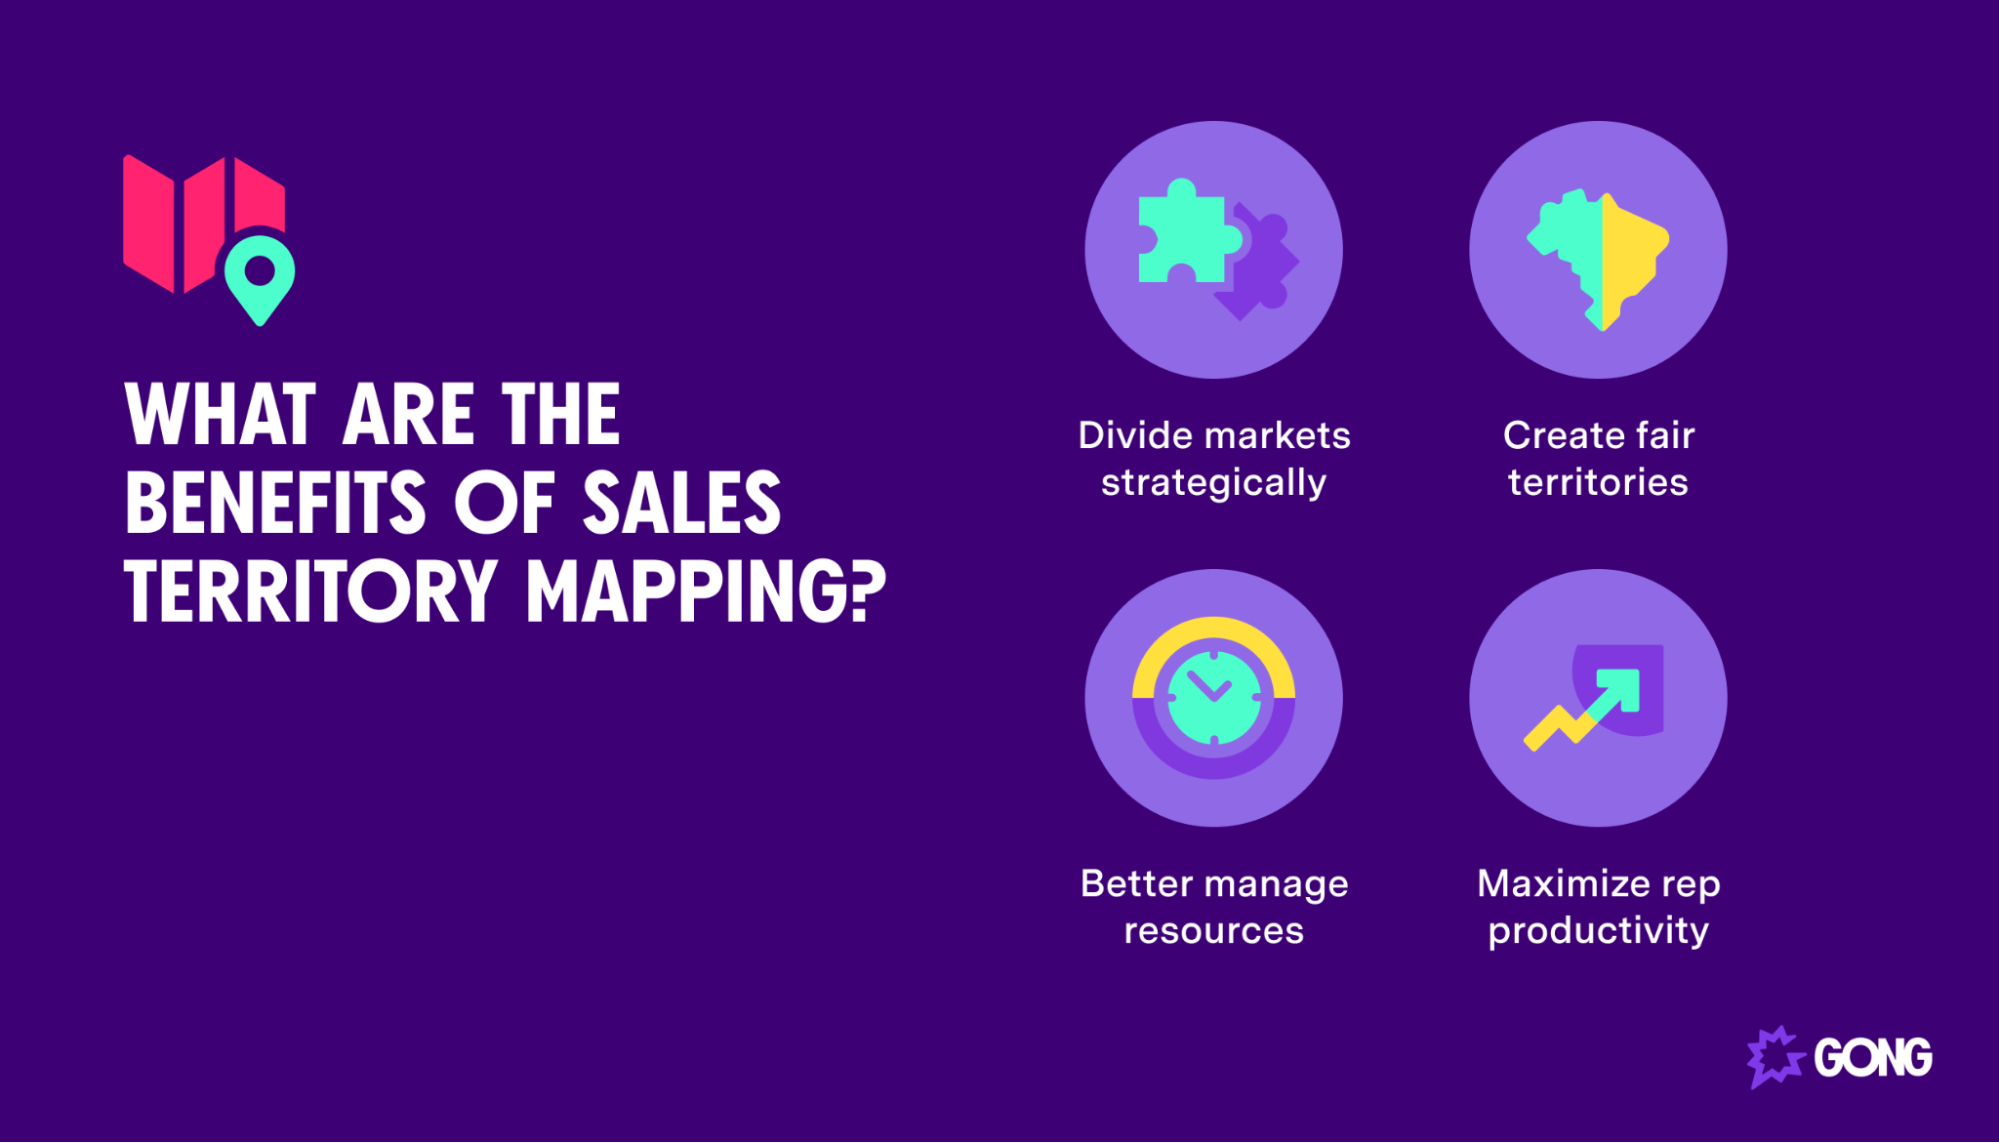 What are the benefits of sales territory mapping